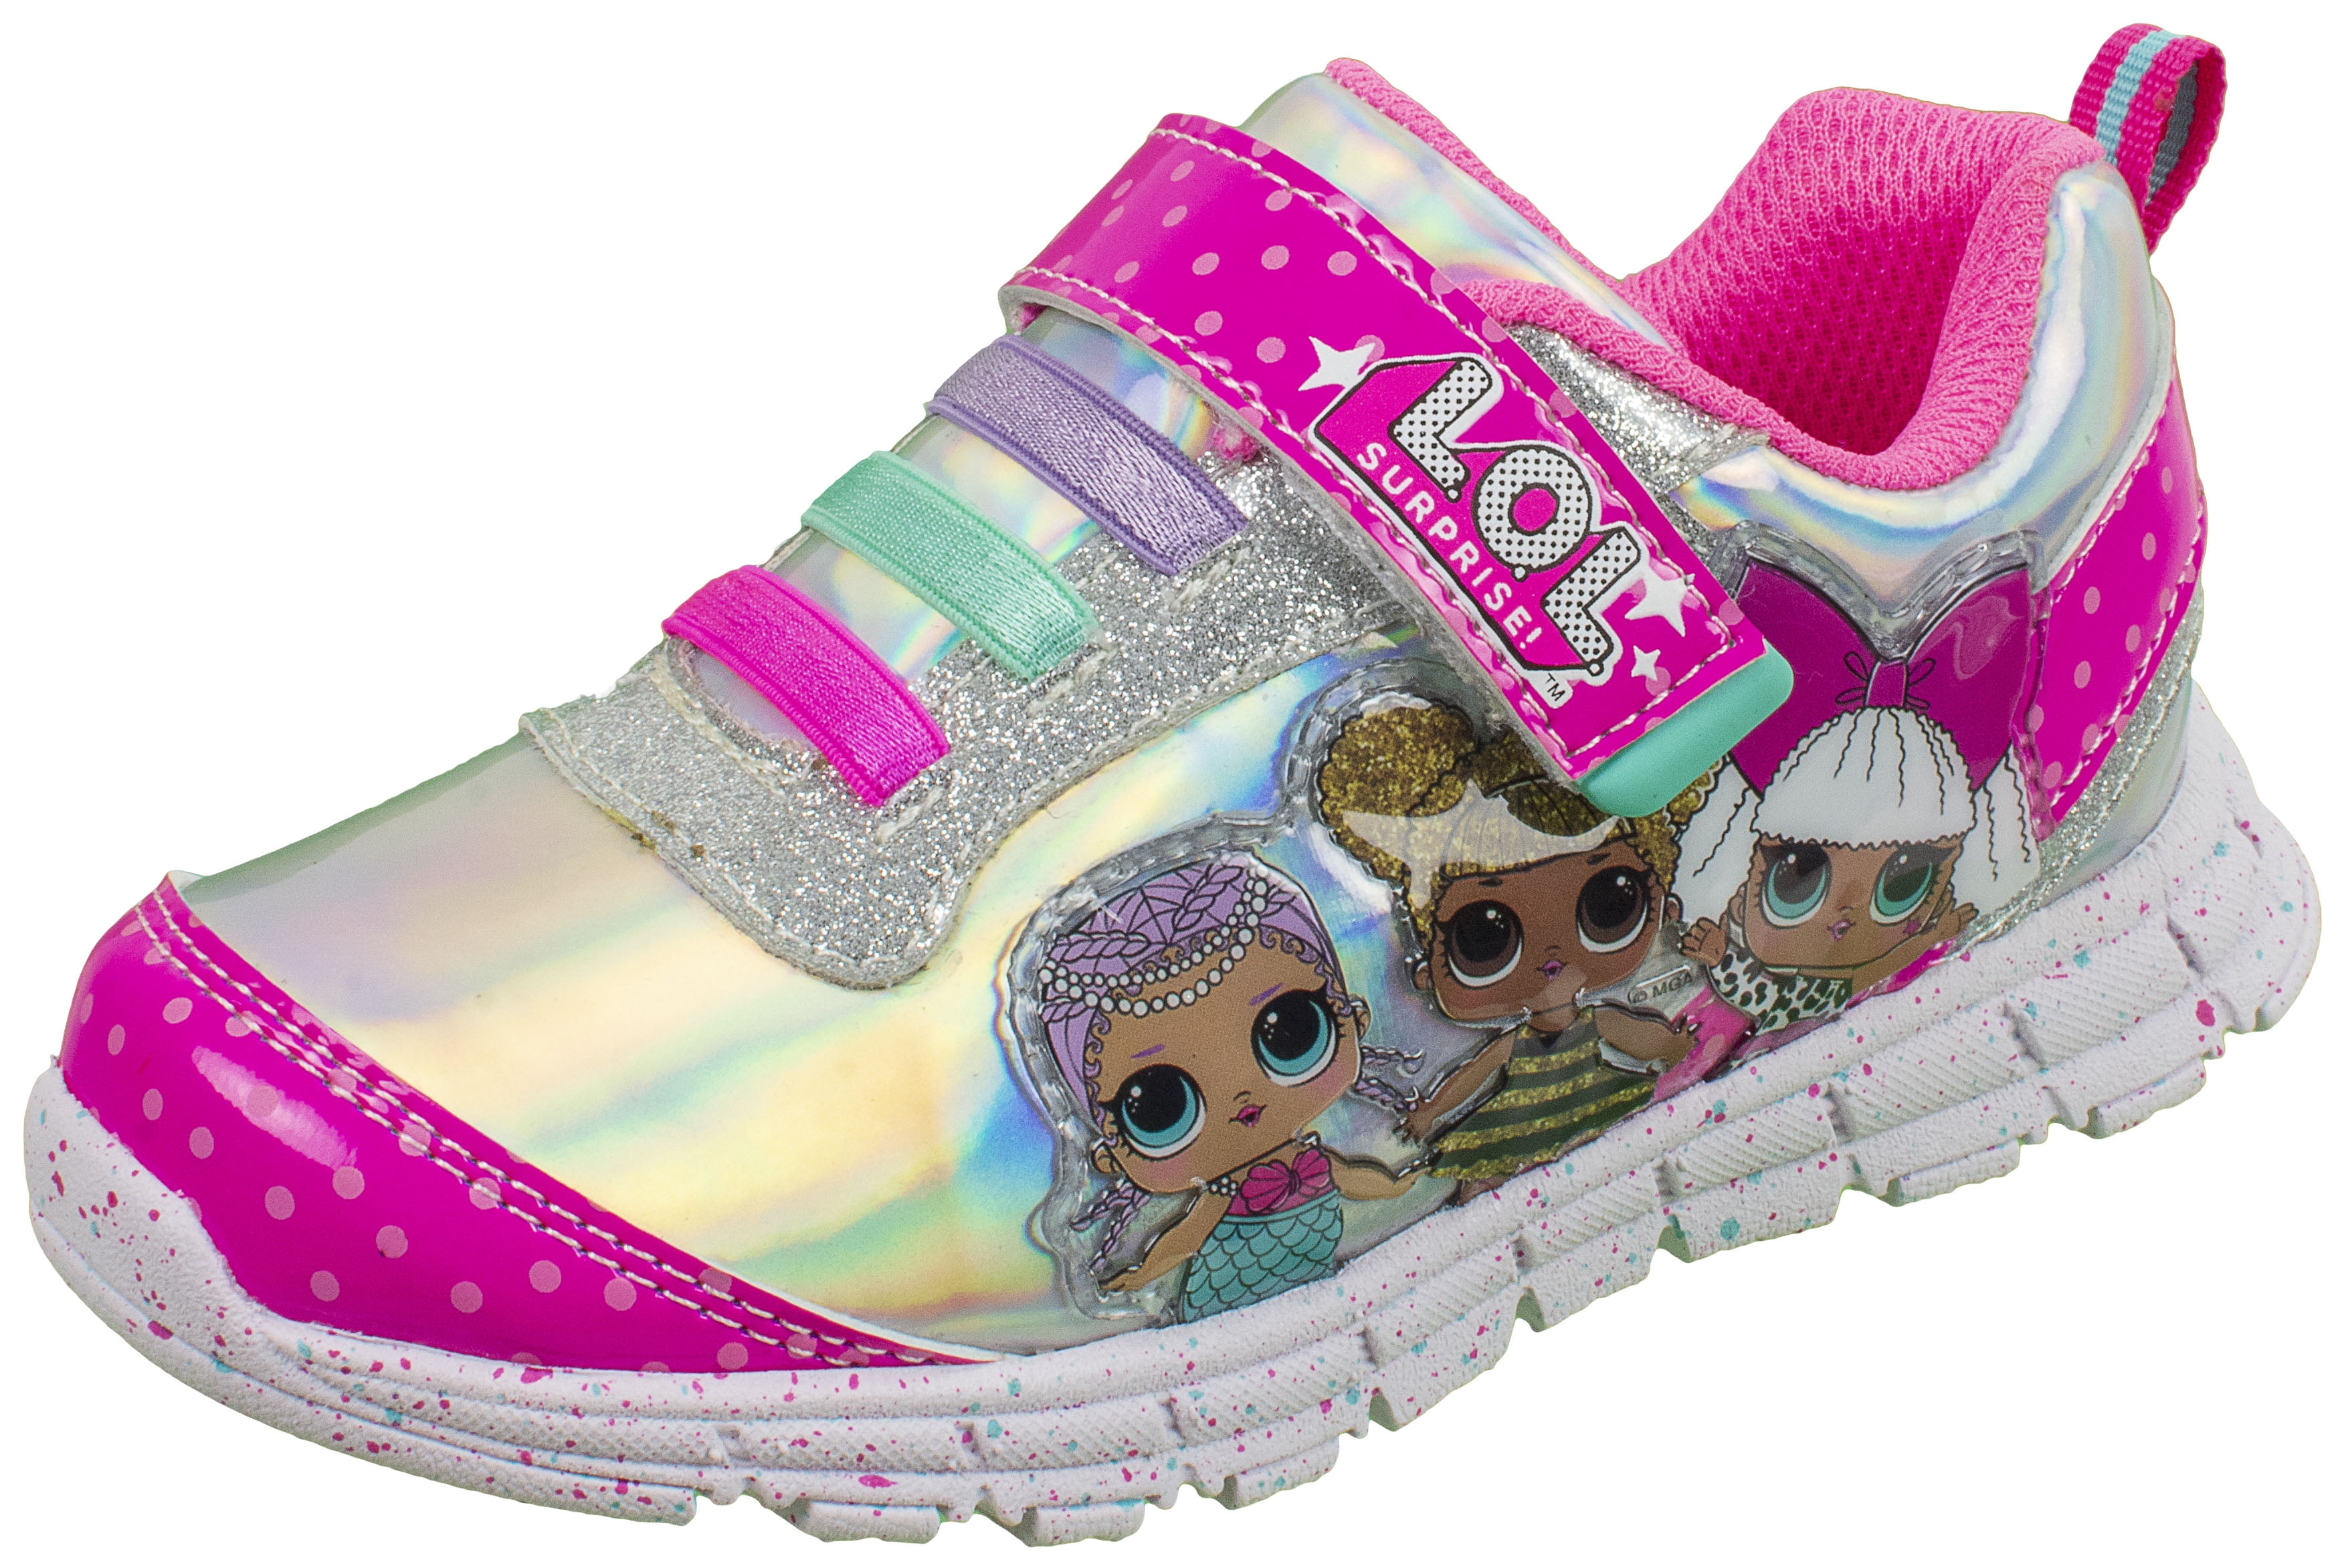 L.O.L Surprise Girls Sneakers, Light Up 